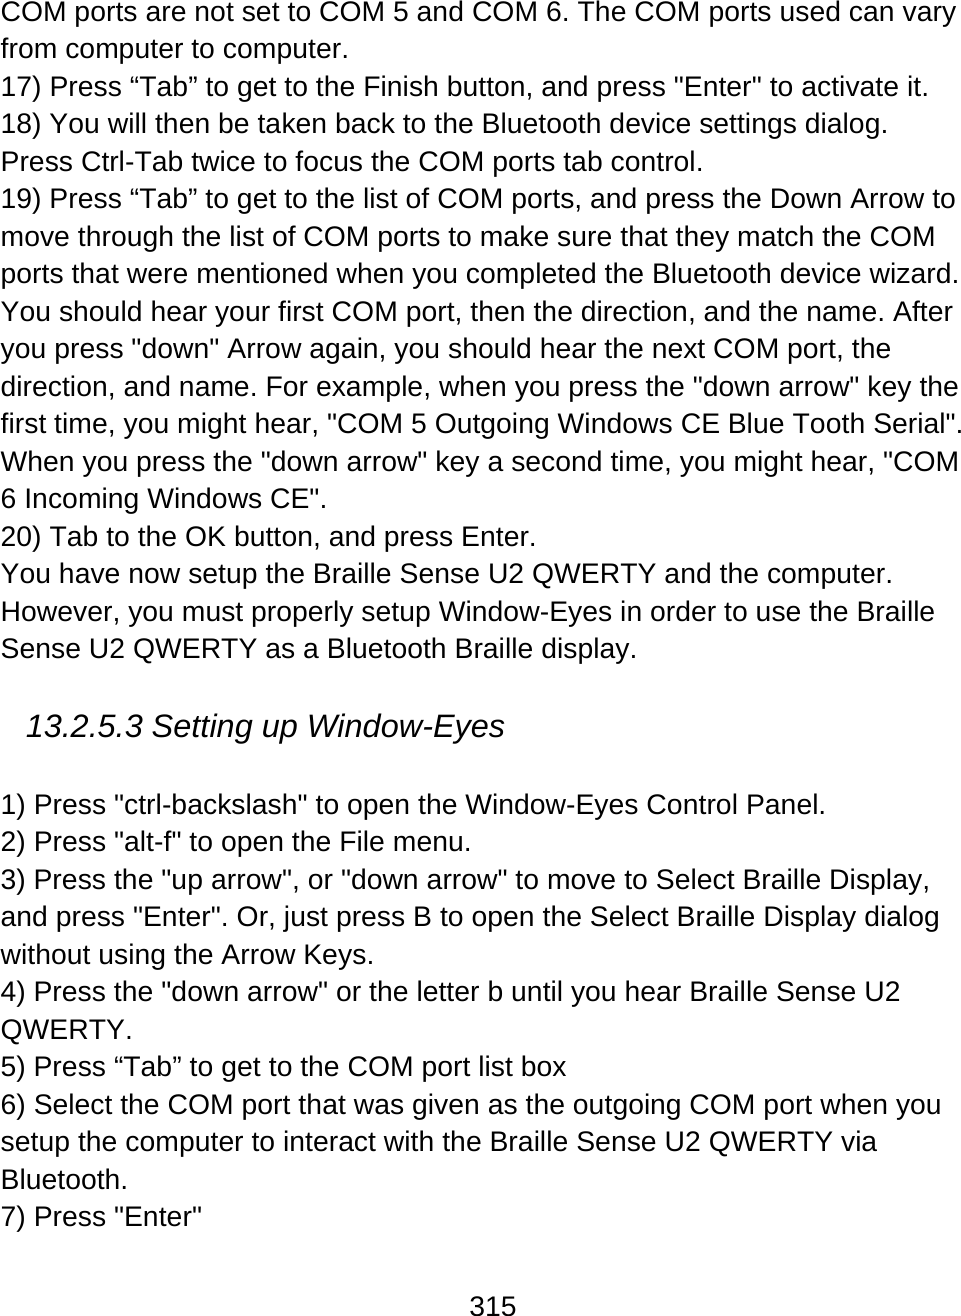 315  COM ports are not set to COM 5 and COM 6. The COM ports used can vary from computer to computer. 17) Press “Tab” to get to the Finish button, and press &quot;Enter&quot; to activate it. 18) You will then be taken back to the Bluetooth device settings dialog. Press Ctrl-Tab twice to focus the COM ports tab control. 19) Press “Tab” to get to the list of COM ports, and press the Down Arrow to move through the list of COM ports to make sure that they match the COM ports that were mentioned when you completed the Bluetooth device wizard. You should hear your first COM port, then the direction, and the name. After you press &quot;down&quot; Arrow again, you should hear the next COM port, the direction, and name. For example, when you press the &quot;down arrow&quot; key the first time, you might hear, &quot;COM 5 Outgoing Windows CE Blue Tooth Serial&quot;. When you press the &quot;down arrow&quot; key a second time, you might hear, &quot;COM 6 Incoming Windows CE&quot;. 20) Tab to the OK button, and press Enter. You have now setup the Braille Sense U2 QWERTY and the computer. However, you must properly setup Window-Eyes in order to use the Braille Sense U2 QWERTY as a Bluetooth Braille display.  13.2.5.3 Setting up Window-Eyes  1) Press &quot;ctrl-backslash&quot; to open the Window-Eyes Control Panel. 2) Press &quot;alt-f&quot; to open the File menu. 3) Press the &quot;up arrow&quot;, or &quot;down arrow&quot; to move to Select Braille Display, and press &quot;Enter&quot;. Or, just press B to open the Select Braille Display dialog without using the Arrow Keys. 4) Press the &quot;down arrow&quot; or the letter b until you hear Braille Sense U2 QWERTY. 5) Press “Tab” to get to the COM port list box 6) Select the COM port that was given as the outgoing COM port when you setup the computer to interact with the Braille Sense U2 QWERTY via Bluetooth. 7) Press &quot;Enter&quot; 